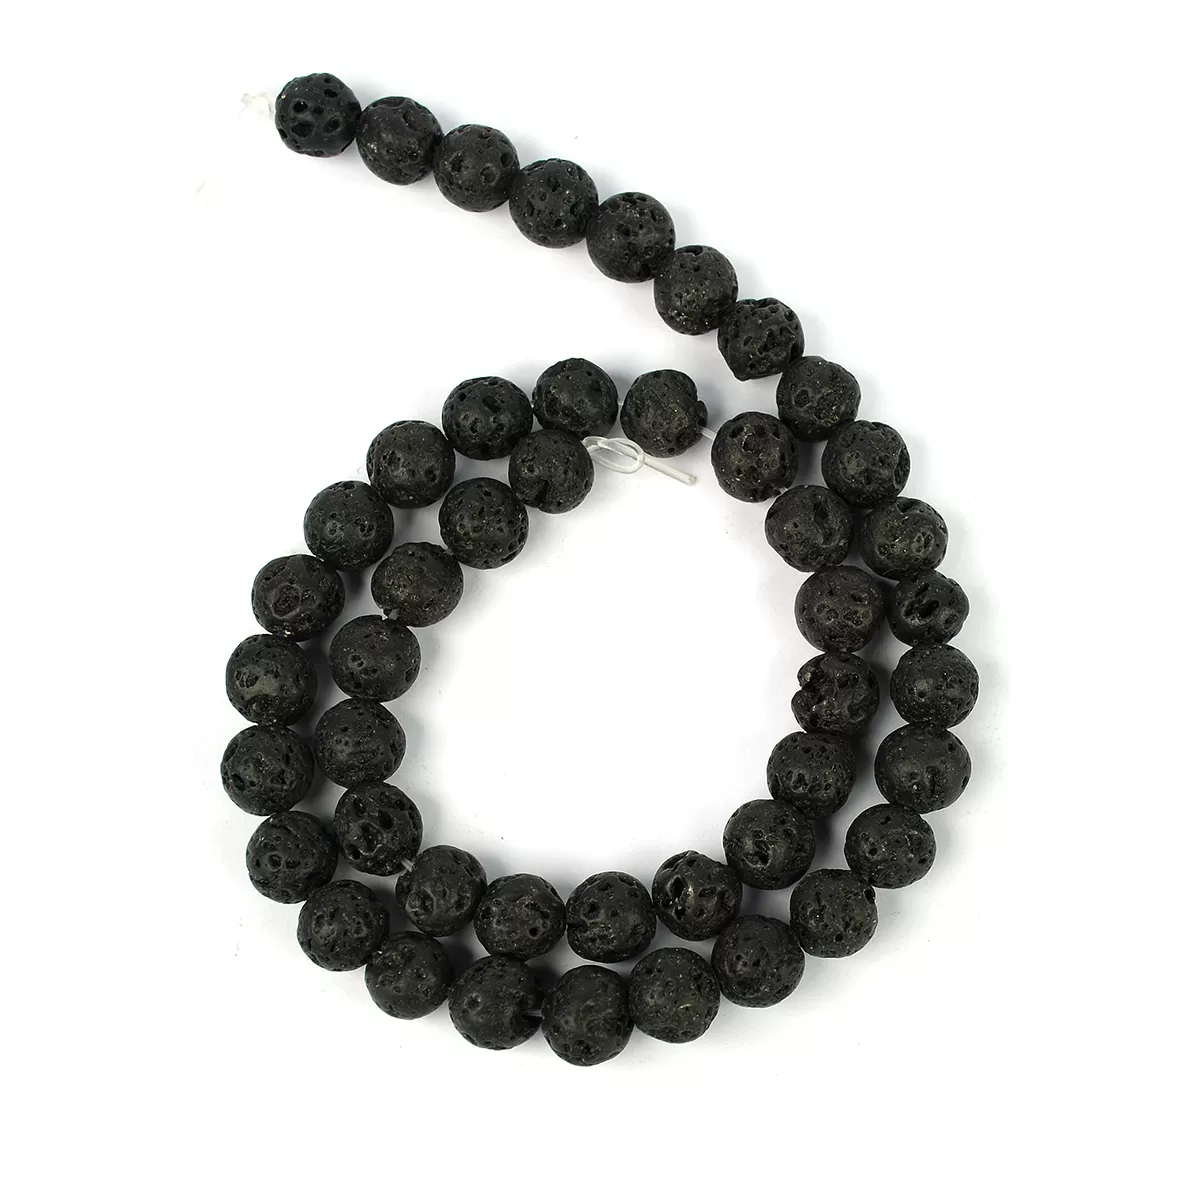 Lava Loose Beads Crystal 8 mm Stone Beads for Jewellery Making Bracelet Beads Mala Beads Crystal Beads for Jewellery Making Necklace/Bracelet/Mala